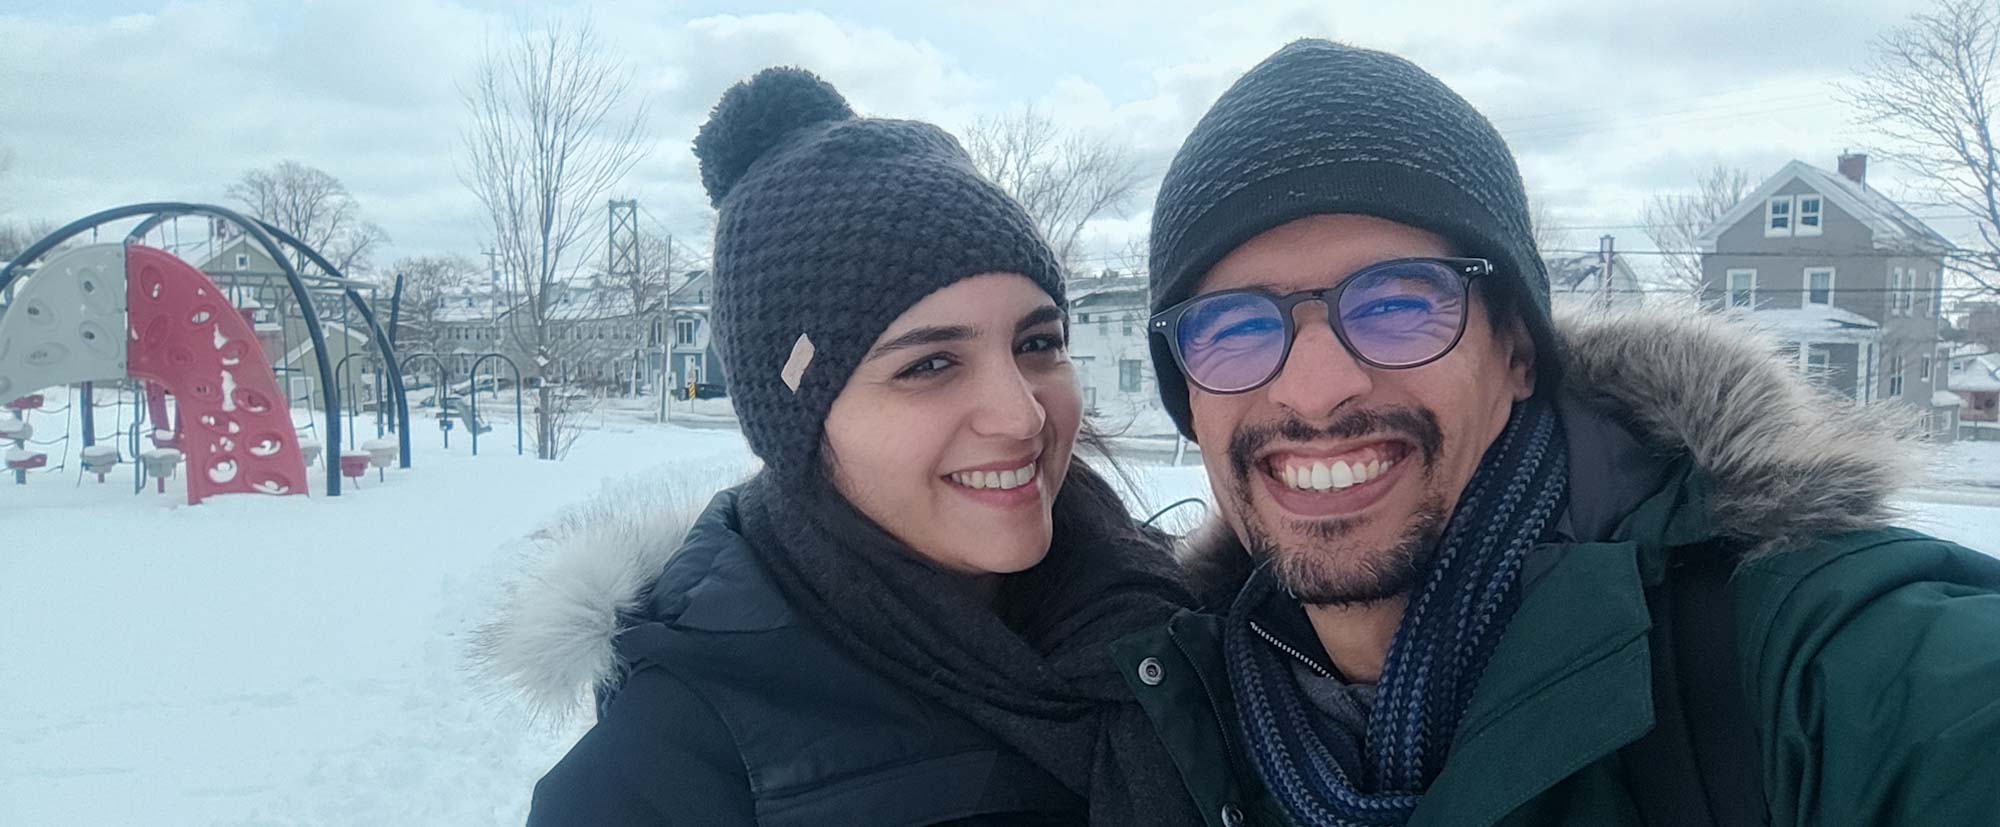 A couple smiles for the camera, outside in the snow.